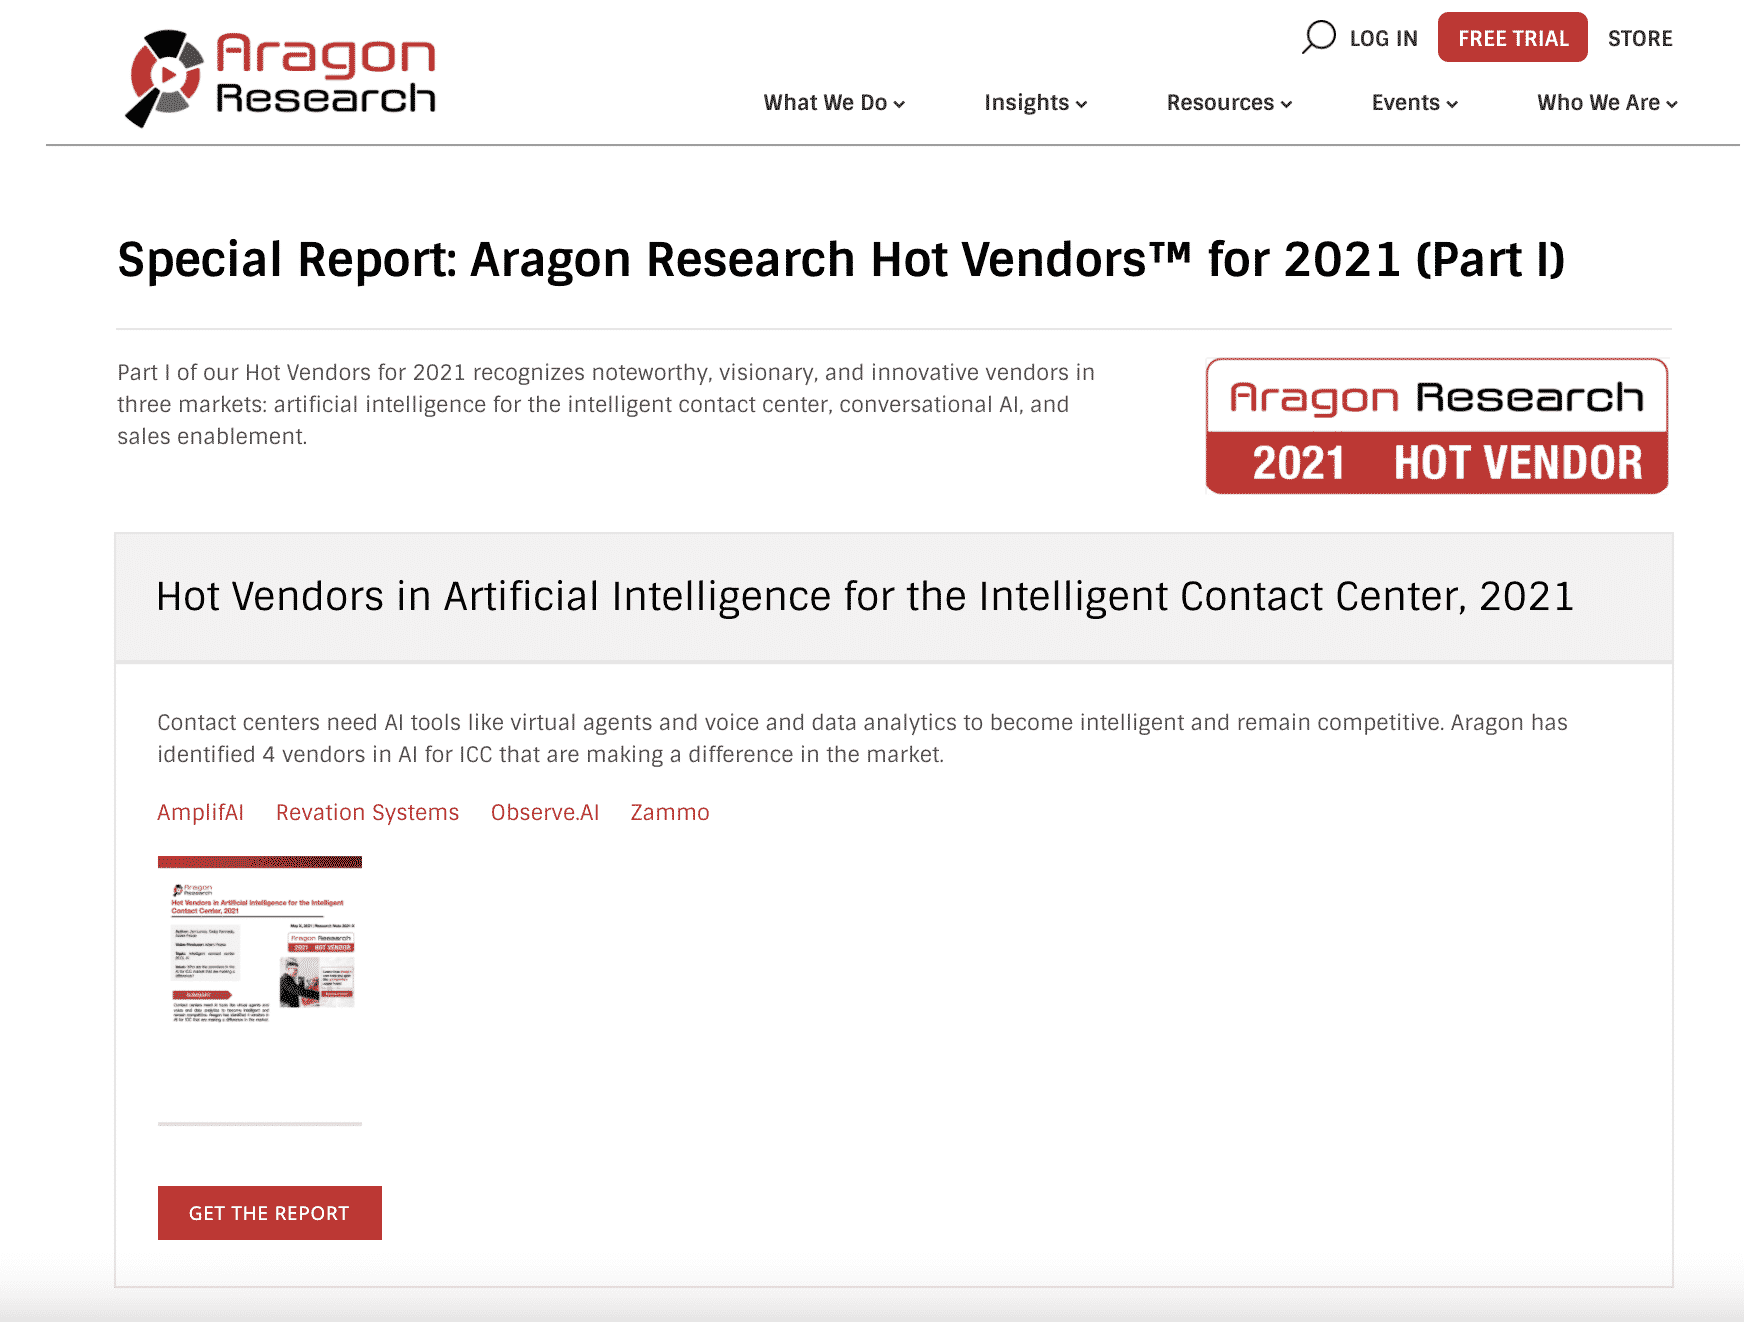 Hot Vendors 2021 Here’s What You Need to Know